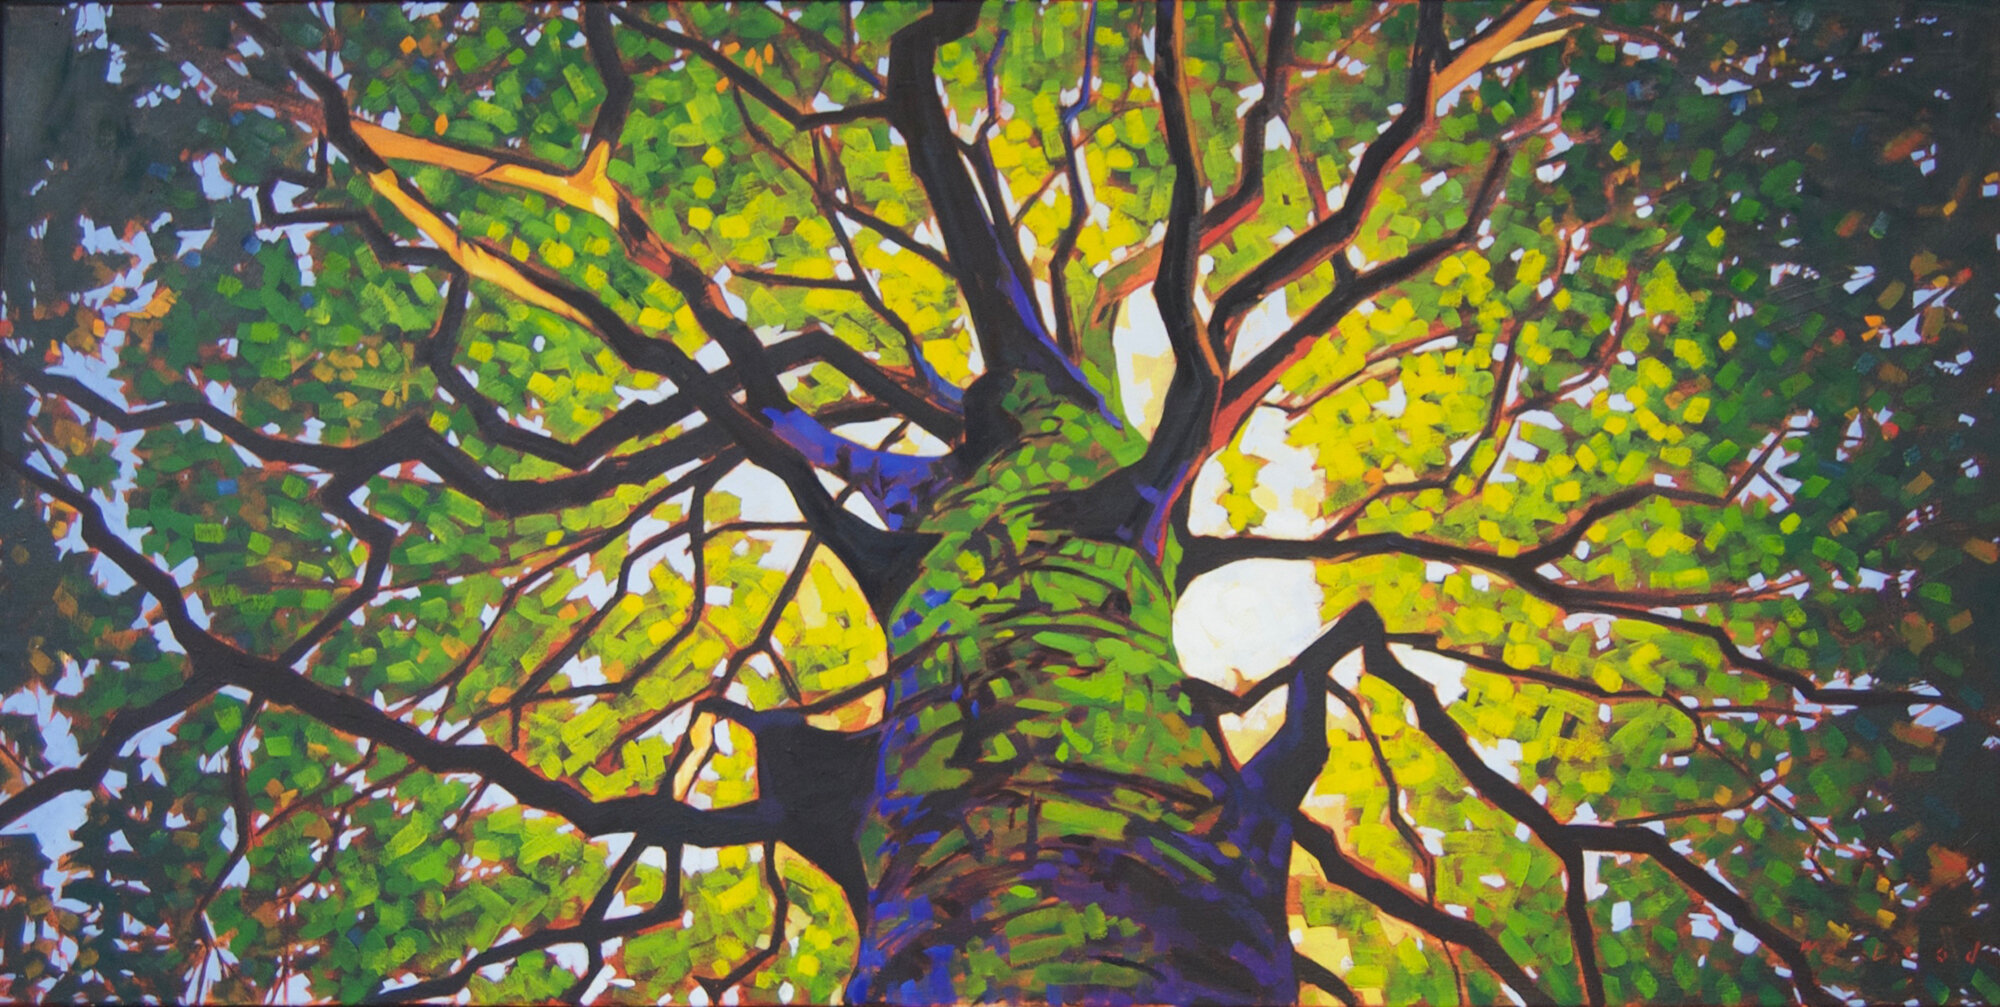    Under A Banyan  , 24” x 48”, oil on canvas 